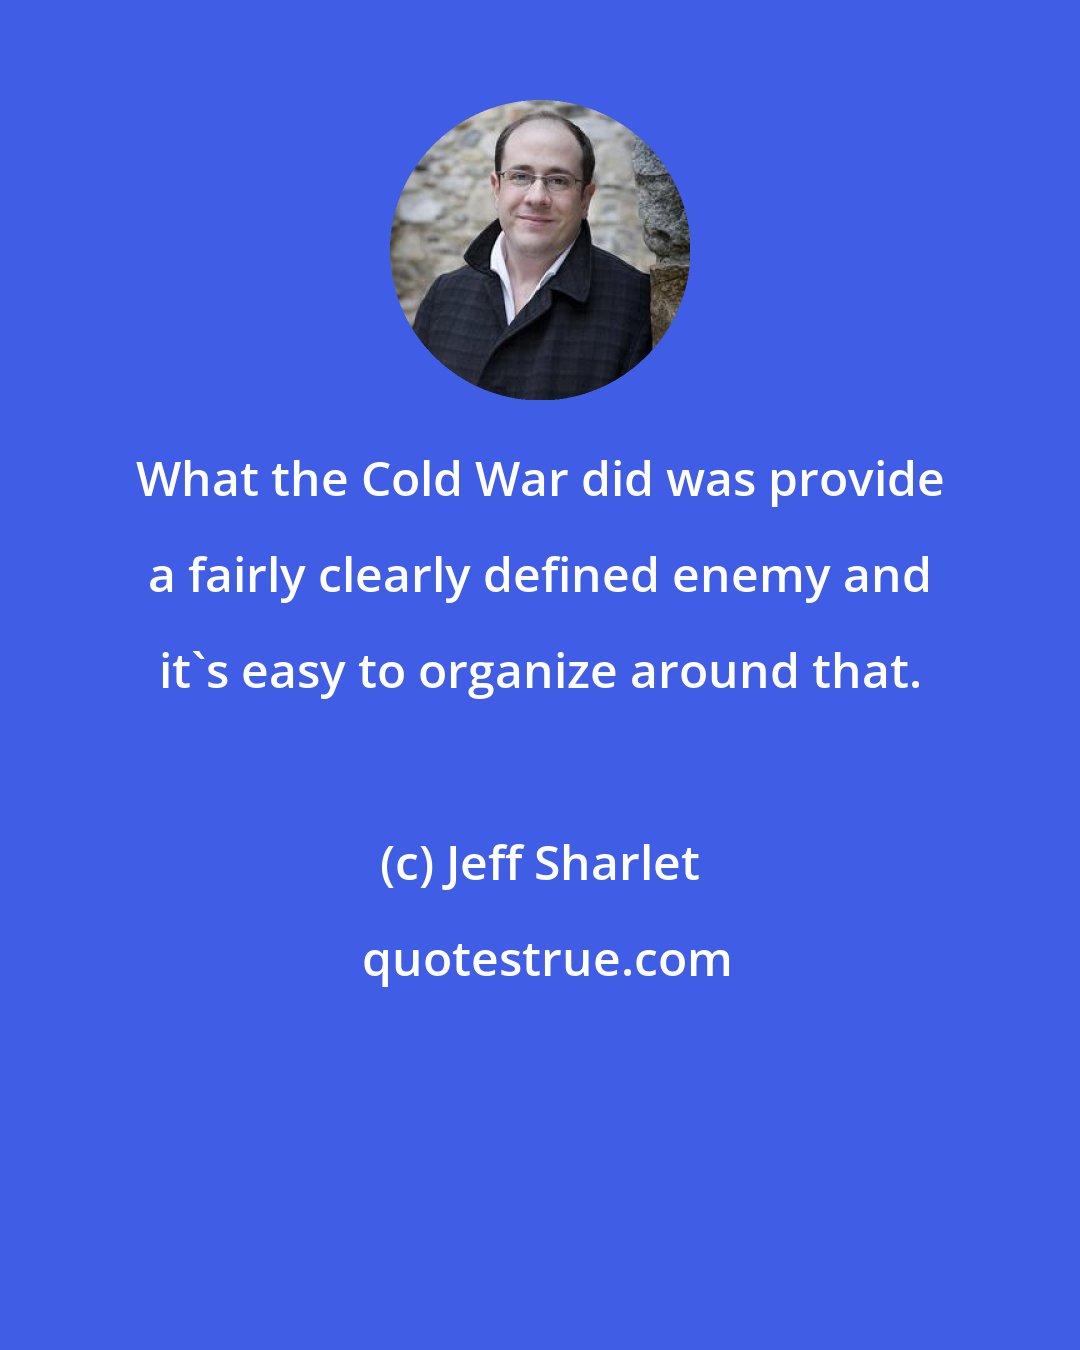 Jeff Sharlet: What the Cold War did was provide a fairly clearly defined enemy and it's easy to organize around that.